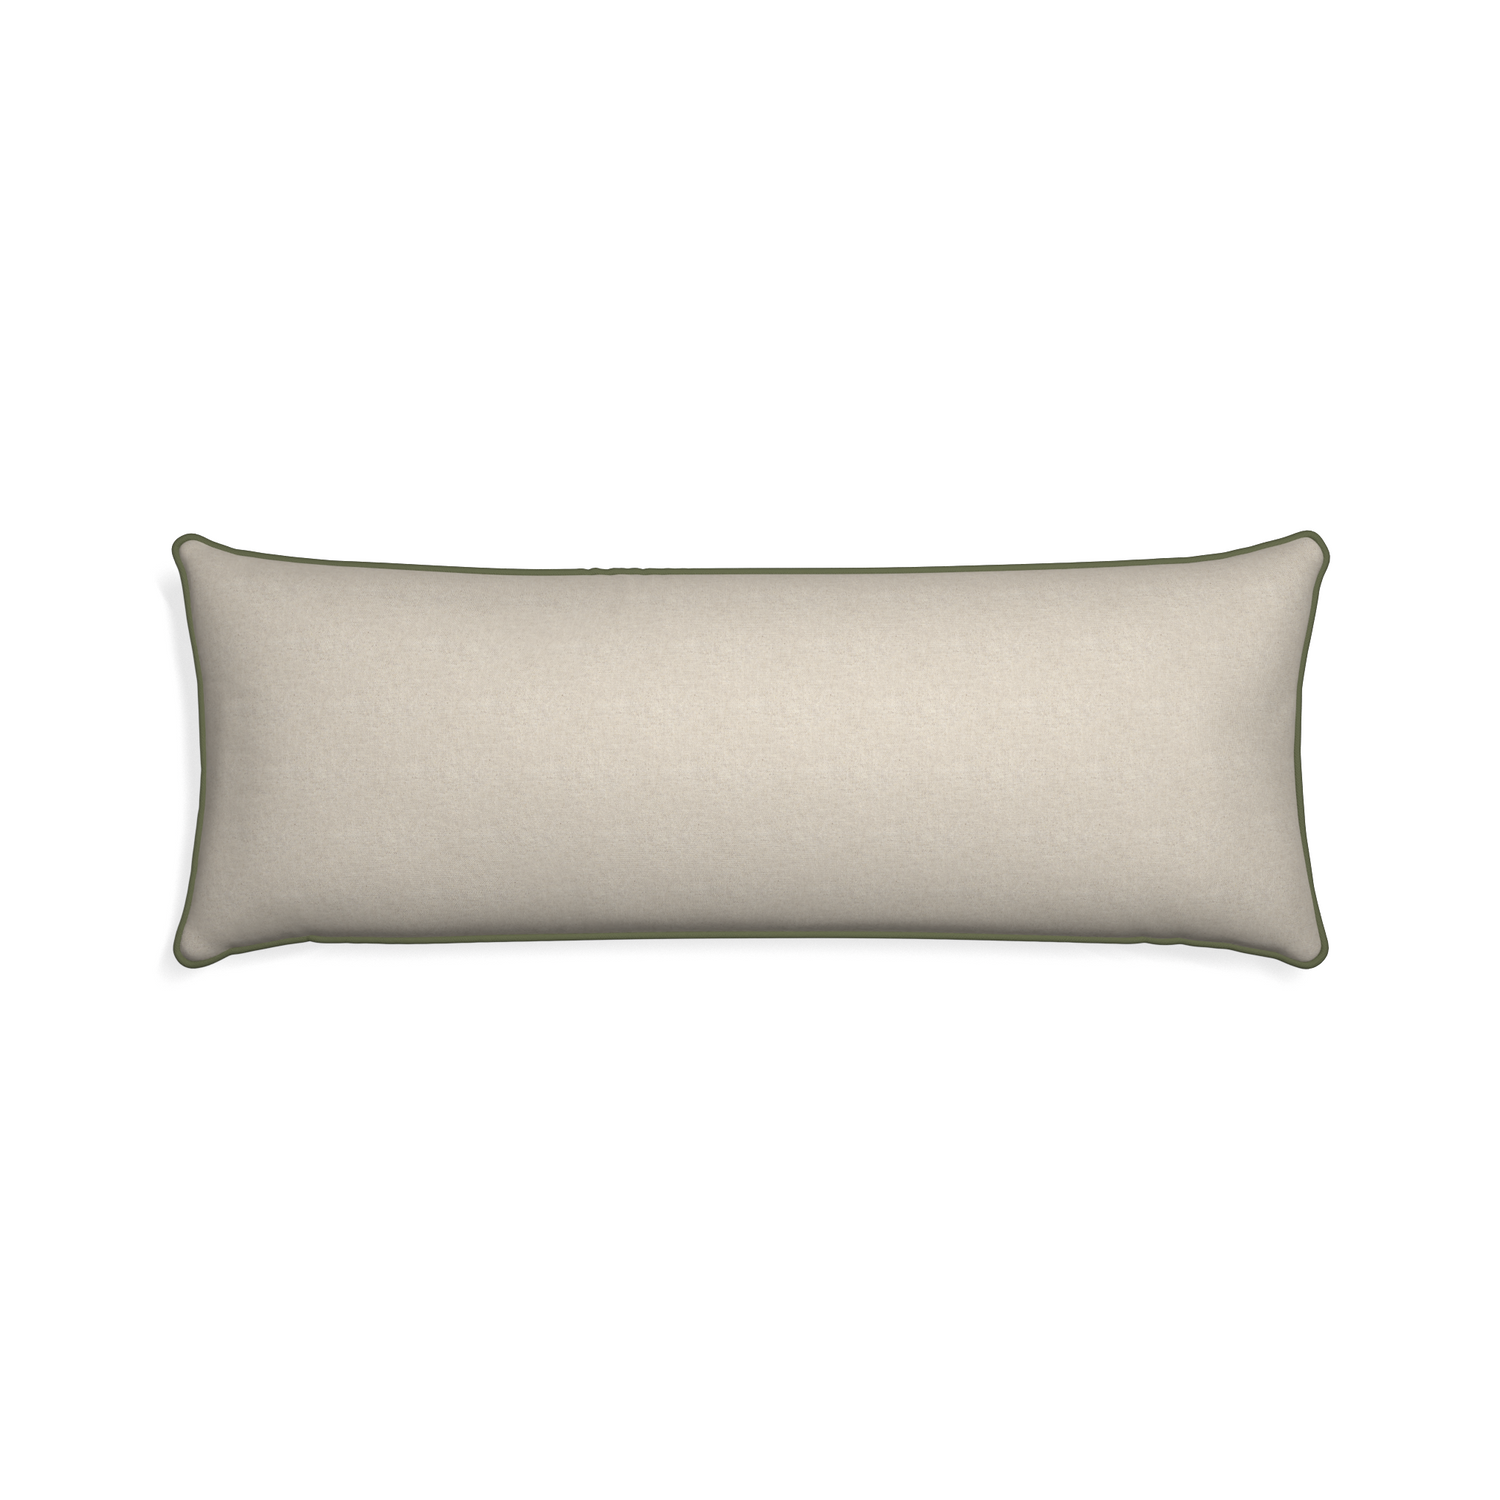 Xl-lumbar oat custom light brownpillow with f piping on white background